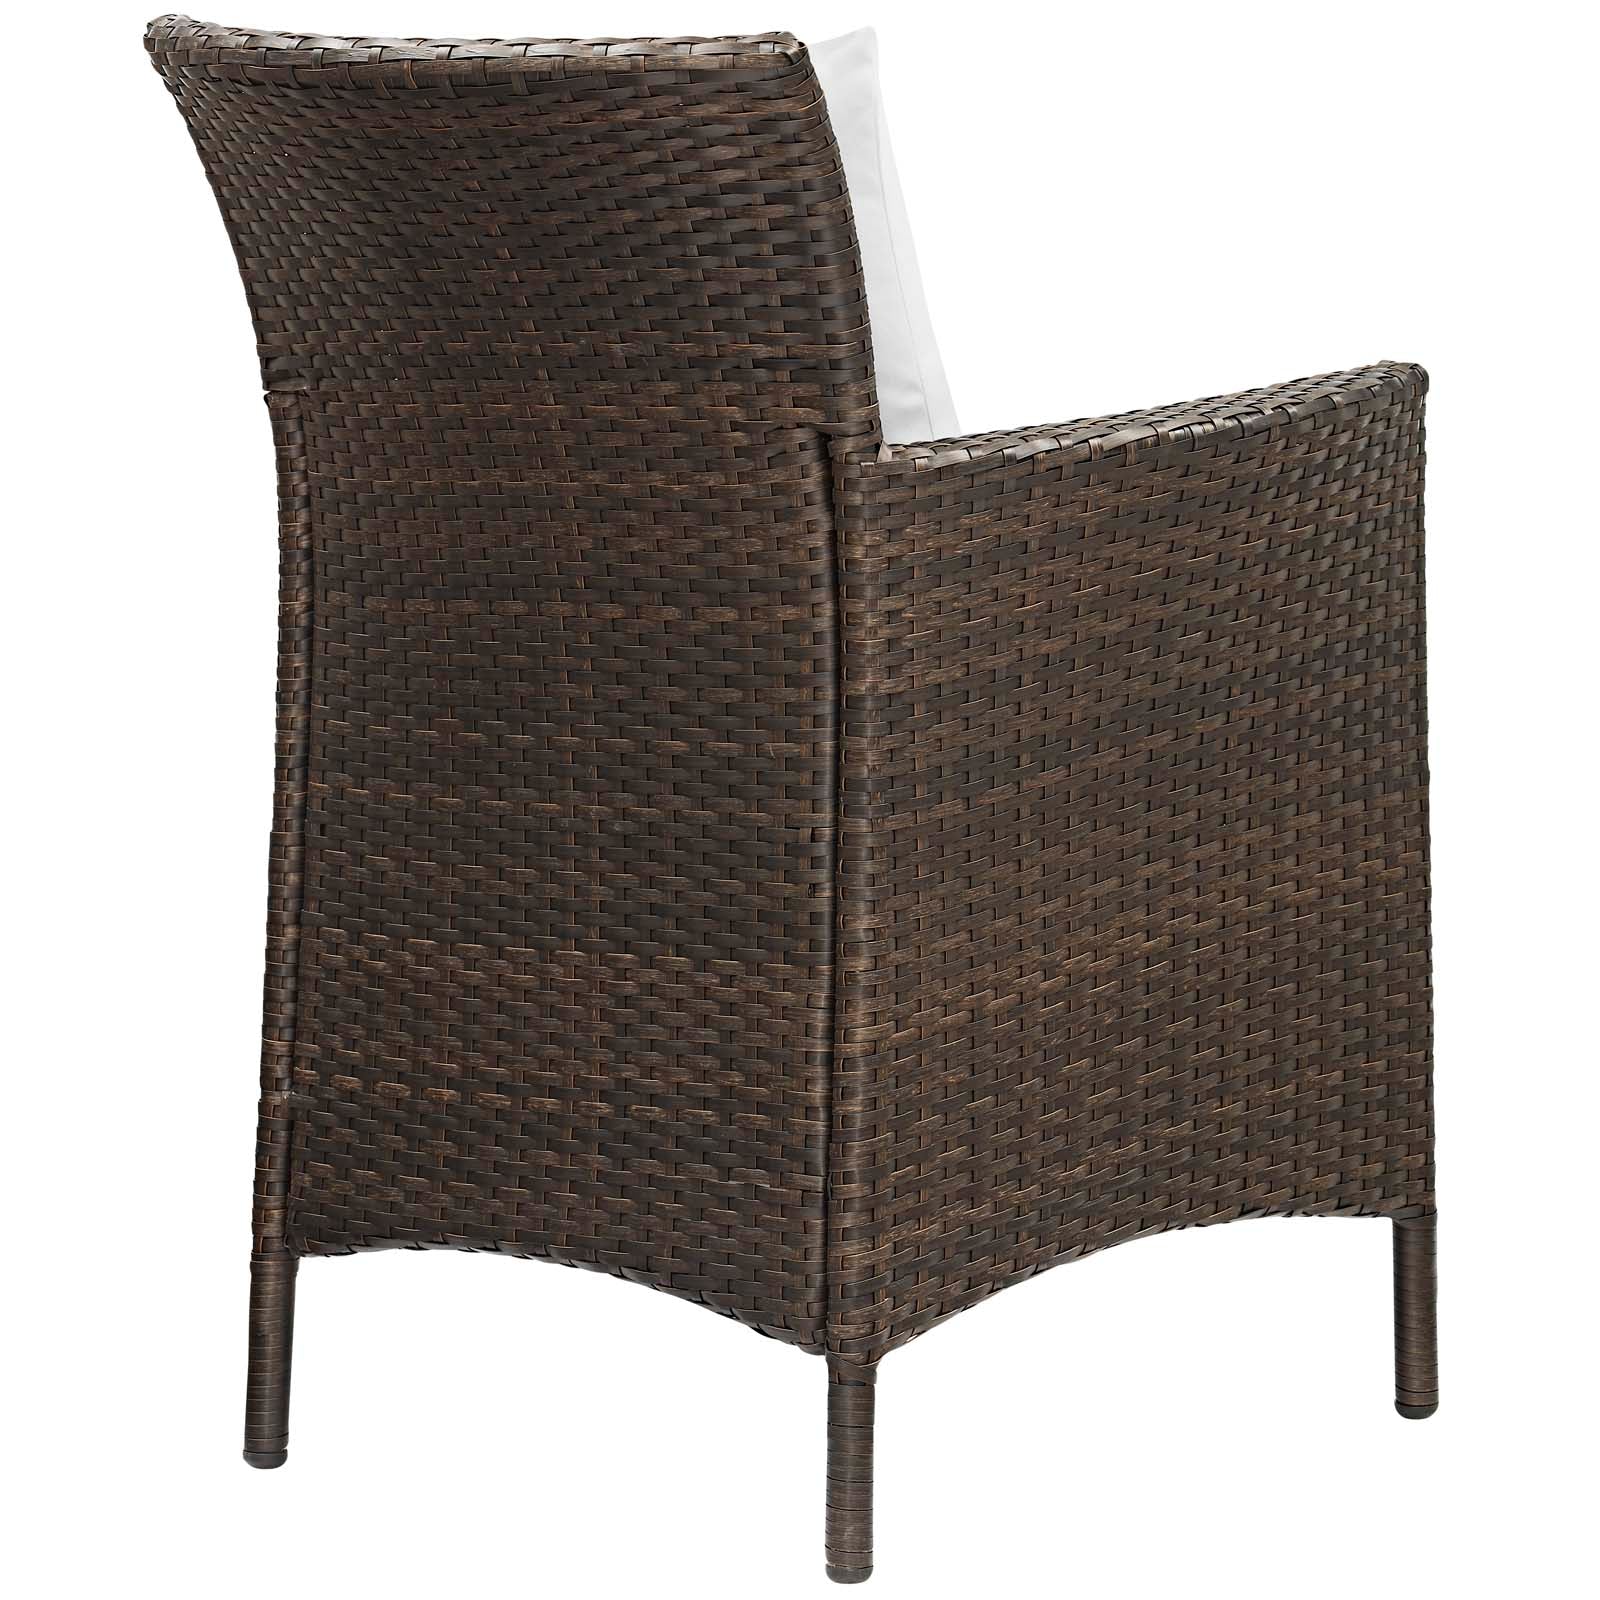 Modway Outdoor Dining Chairs - Conduit Outdoor Patio Wicker Rattan Dining Armchair Set of 2 Brown White